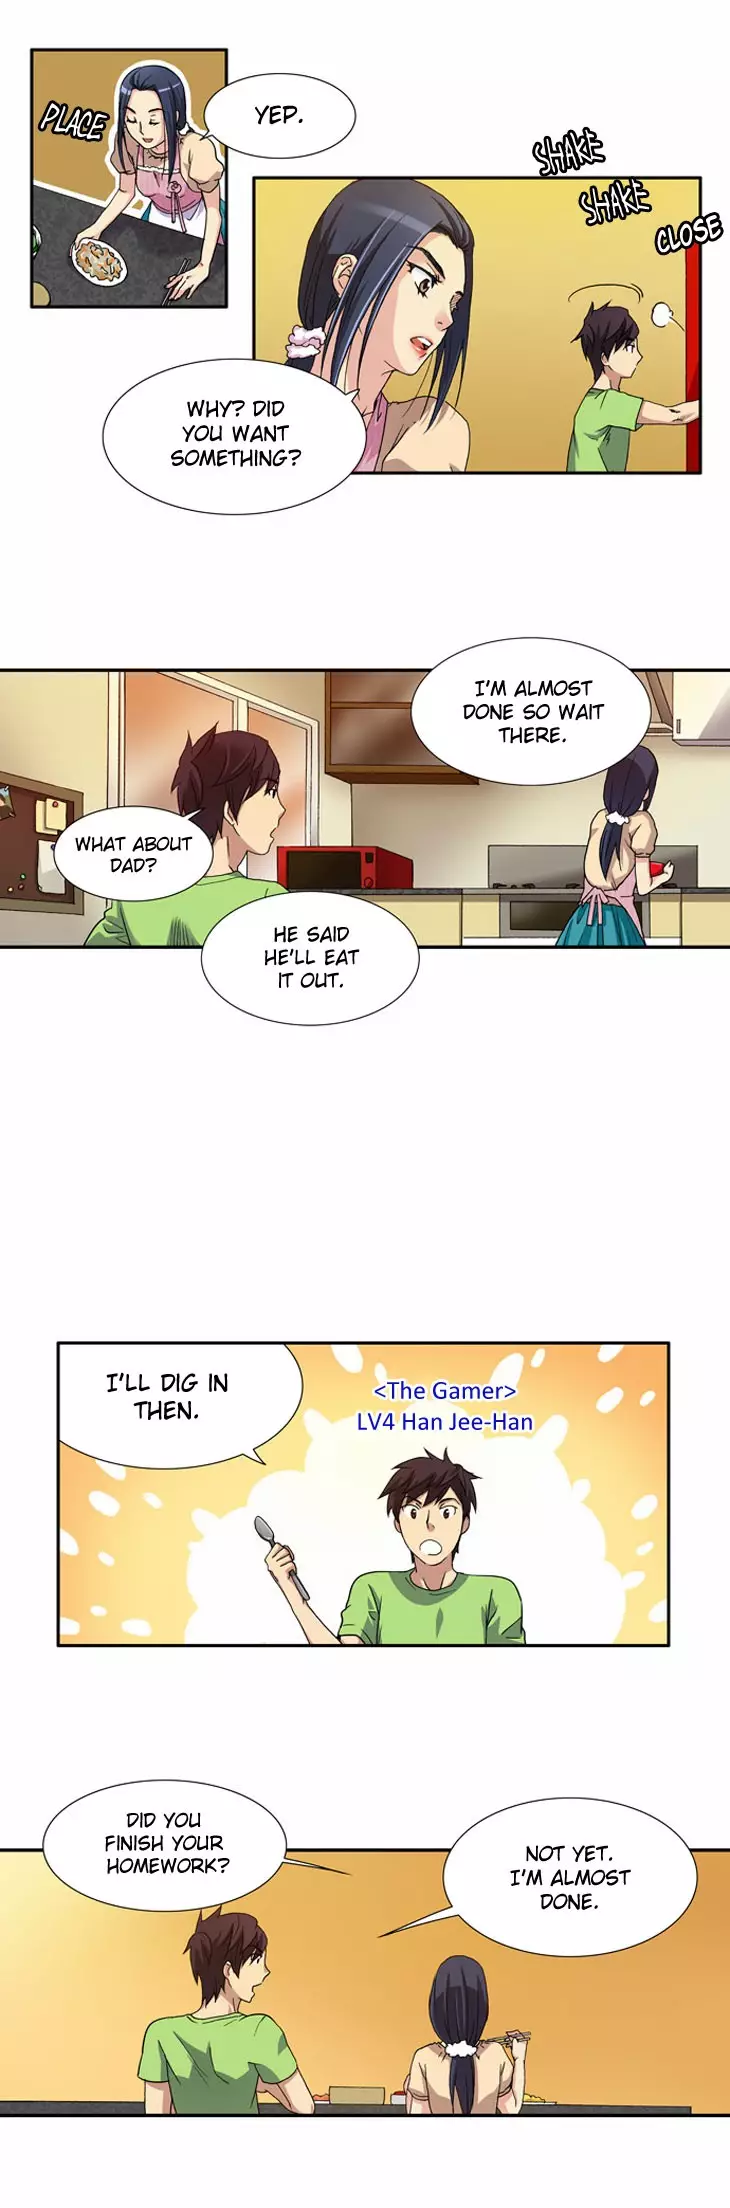 The Gamer - 1 page p_00019